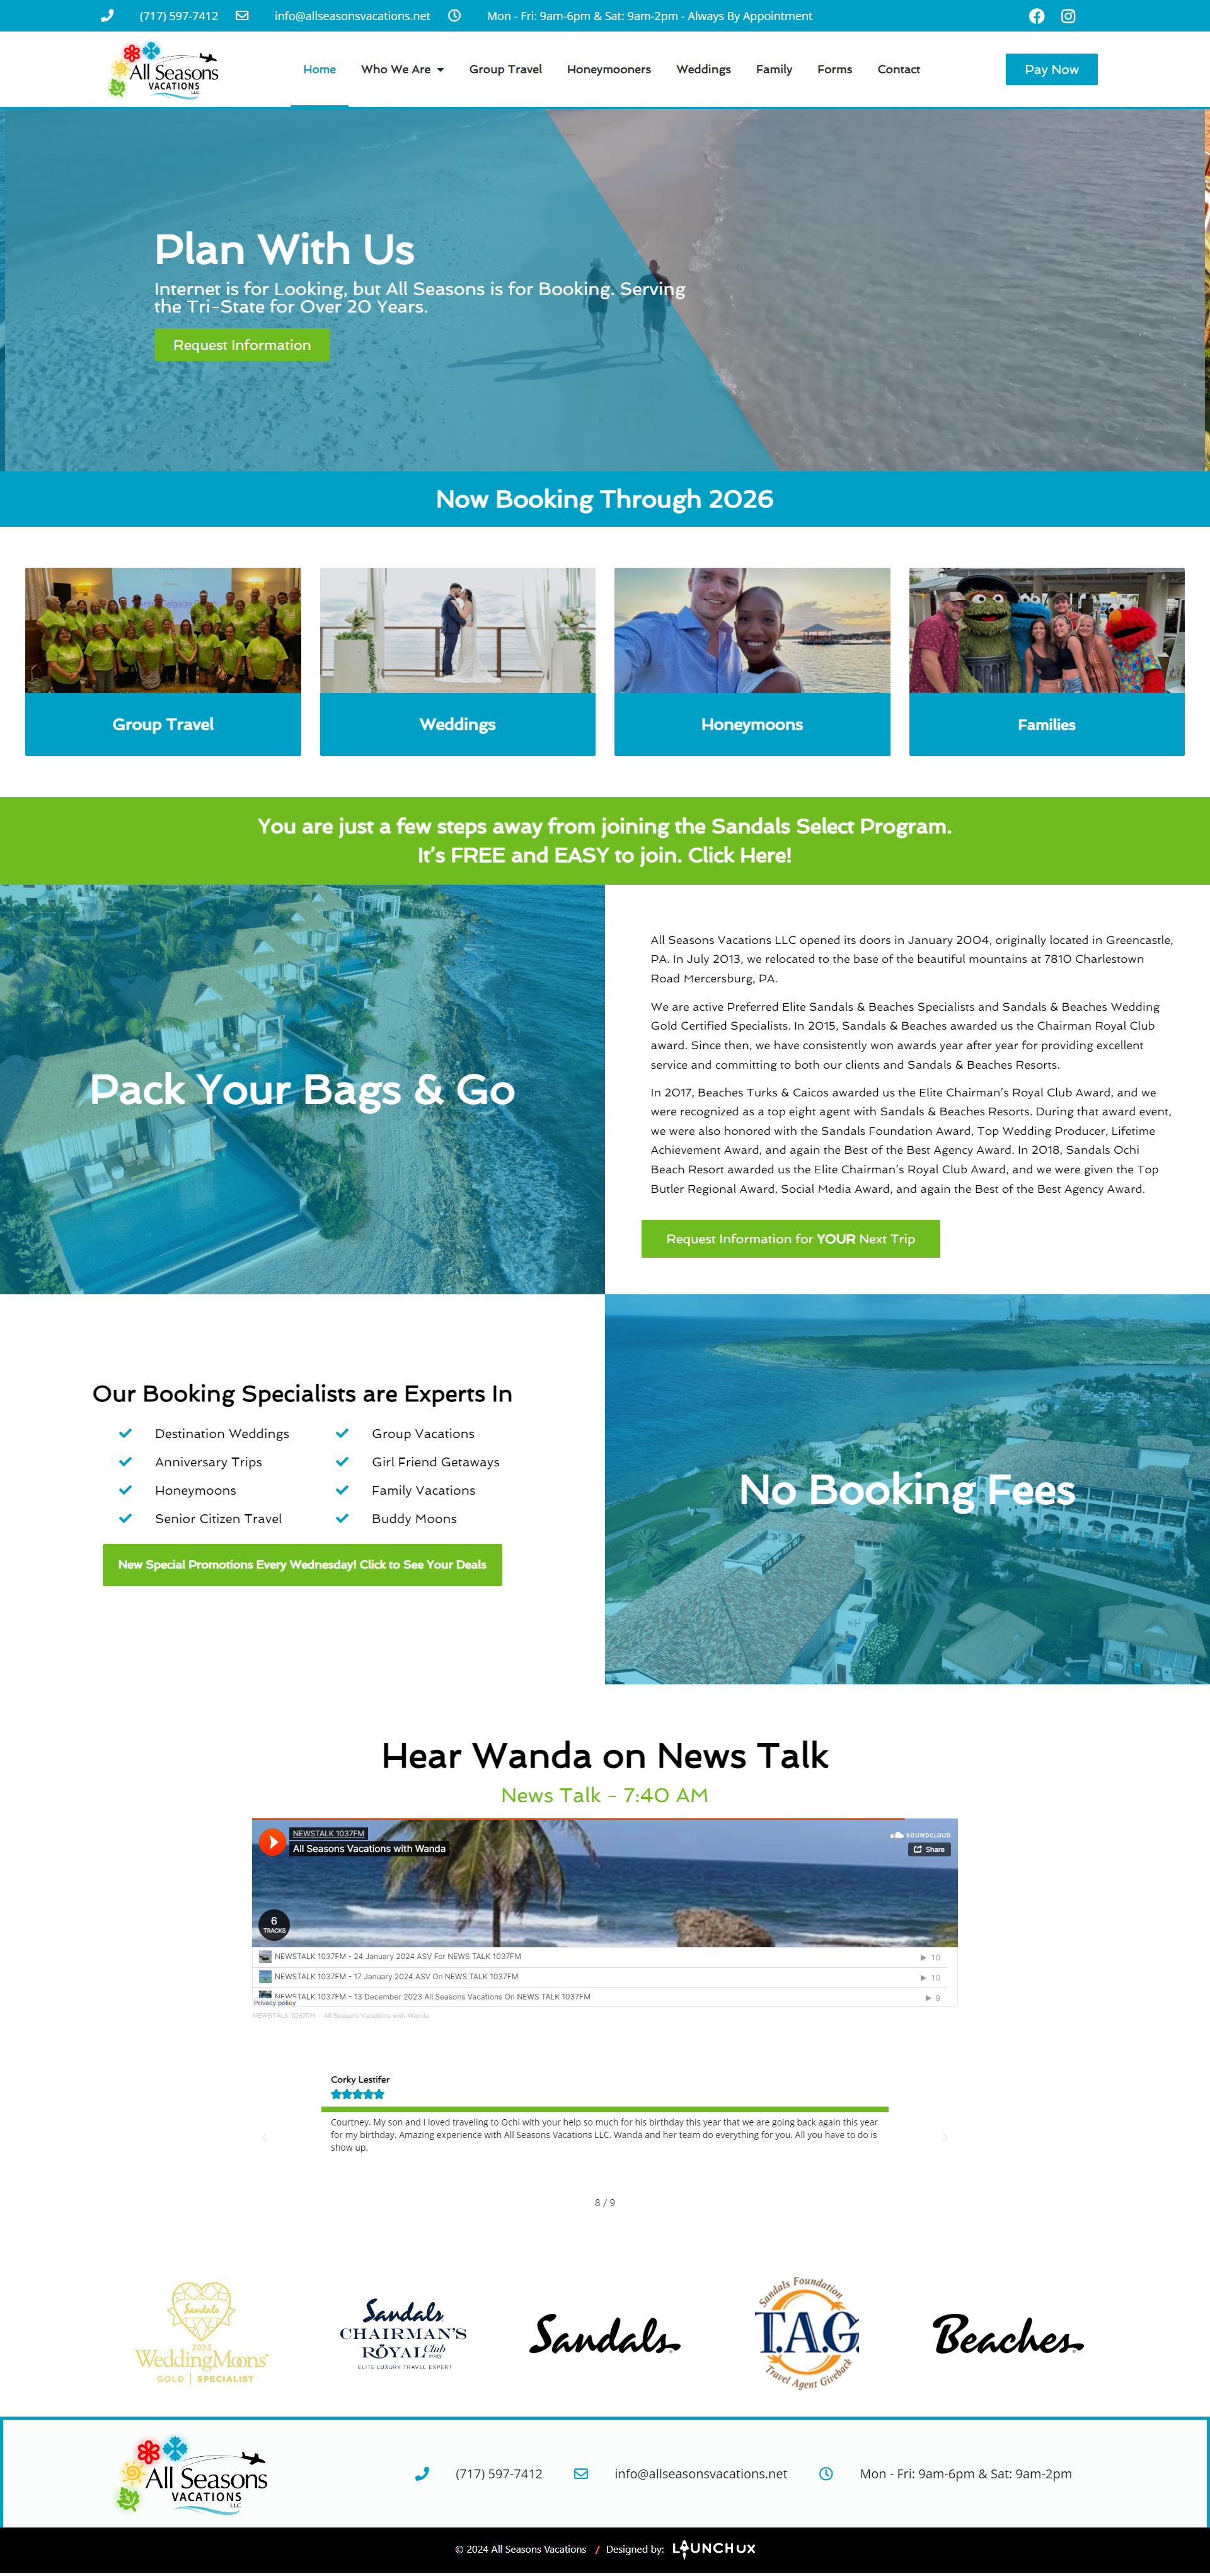 All Seasons Vacations Home Page